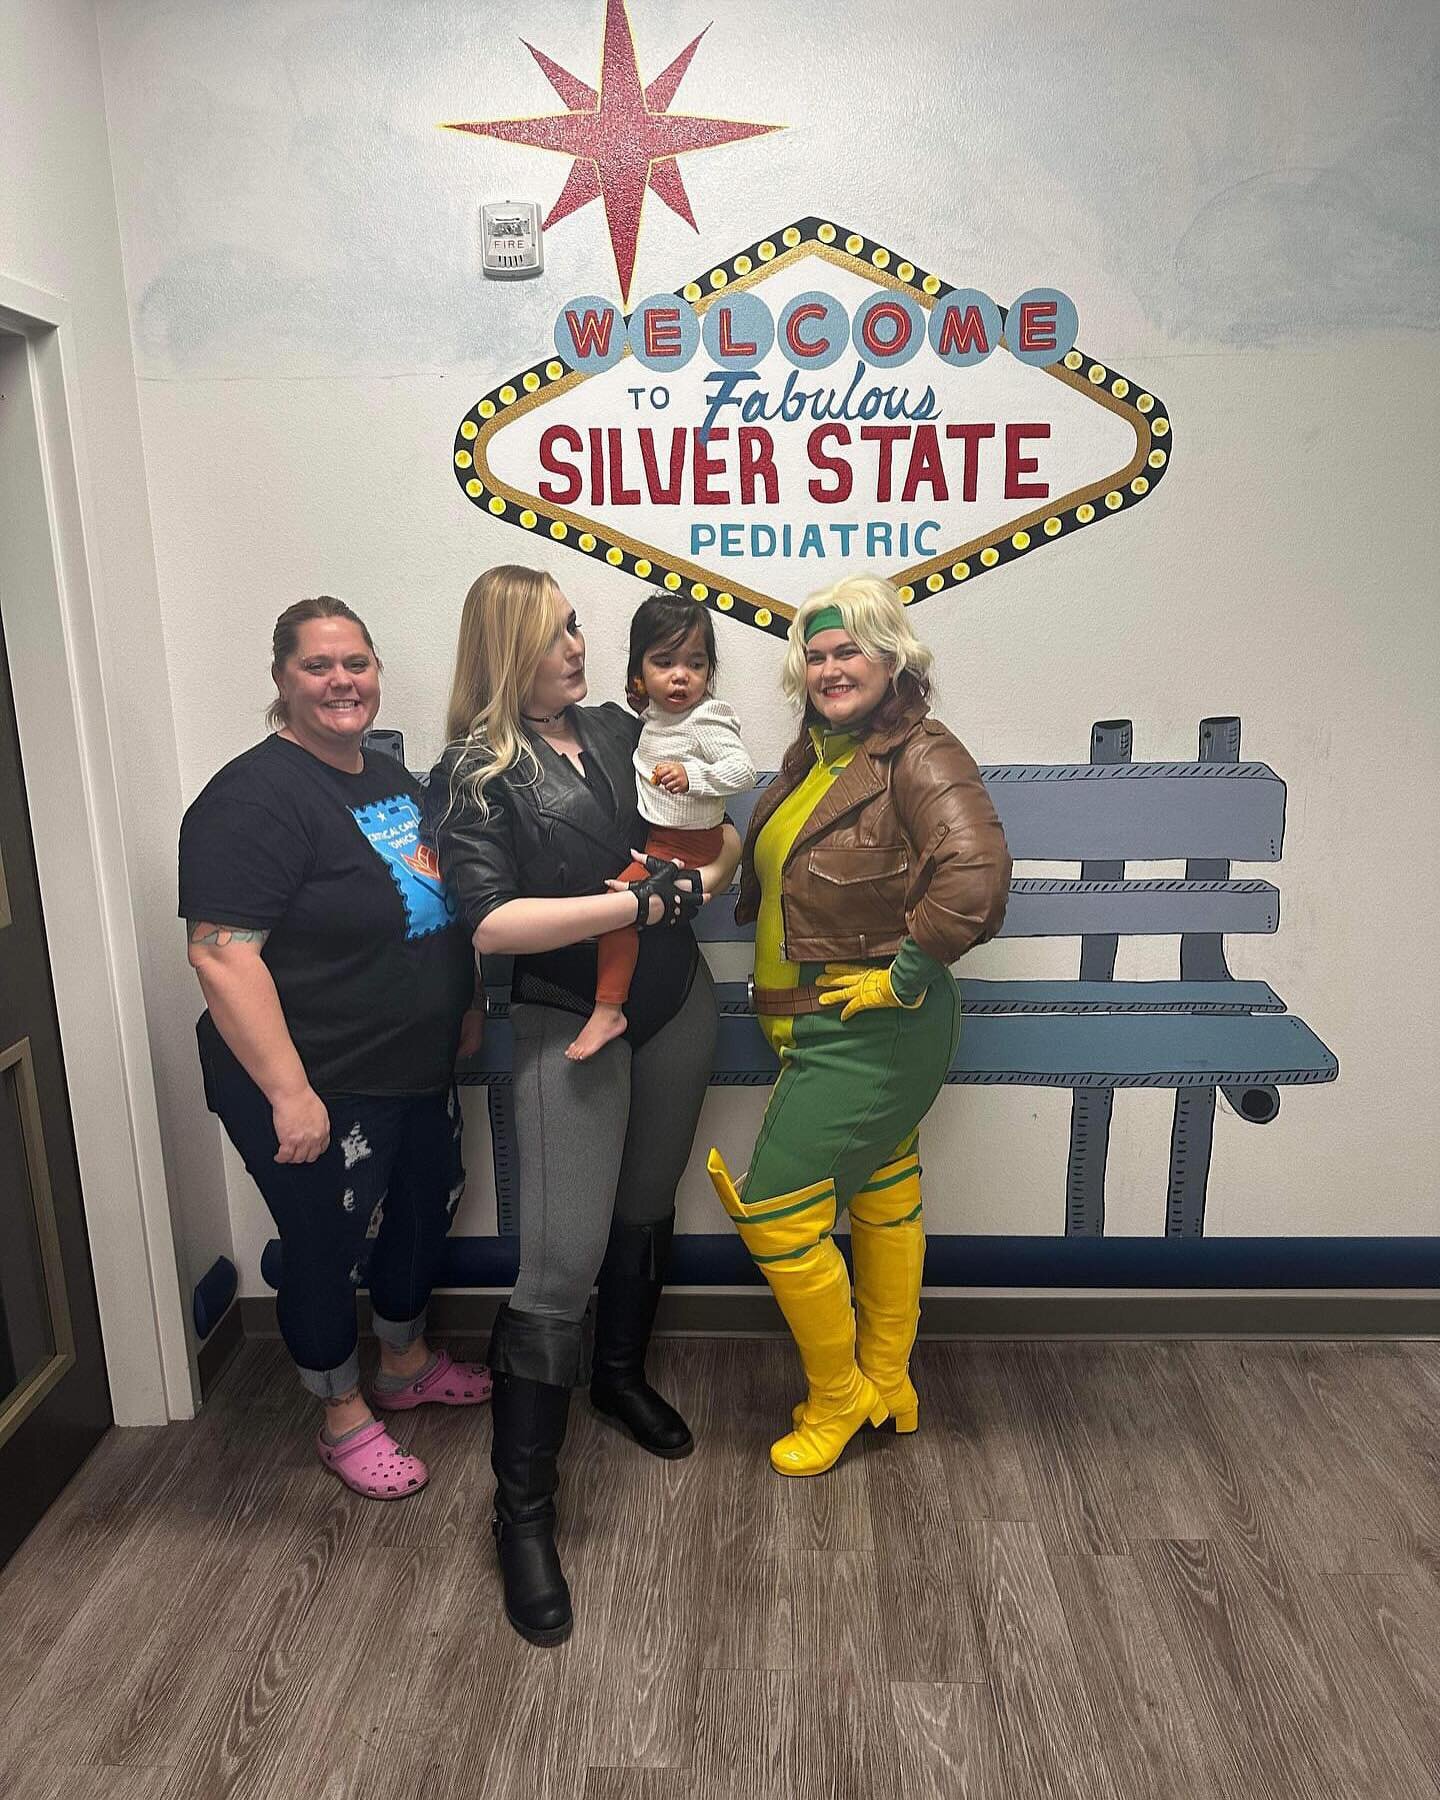 Black Canary and Rogue merged the DC and Marvel universes with Agent Holli to visit Silver State Pediatrics! 🙌

#dcu #dc #marvel #mcu #blackcanary #rogue #xmen #cosplay #cosplayer #fyp #lasvegas #nonprofit #nonprofitorganization #volunteer #service 